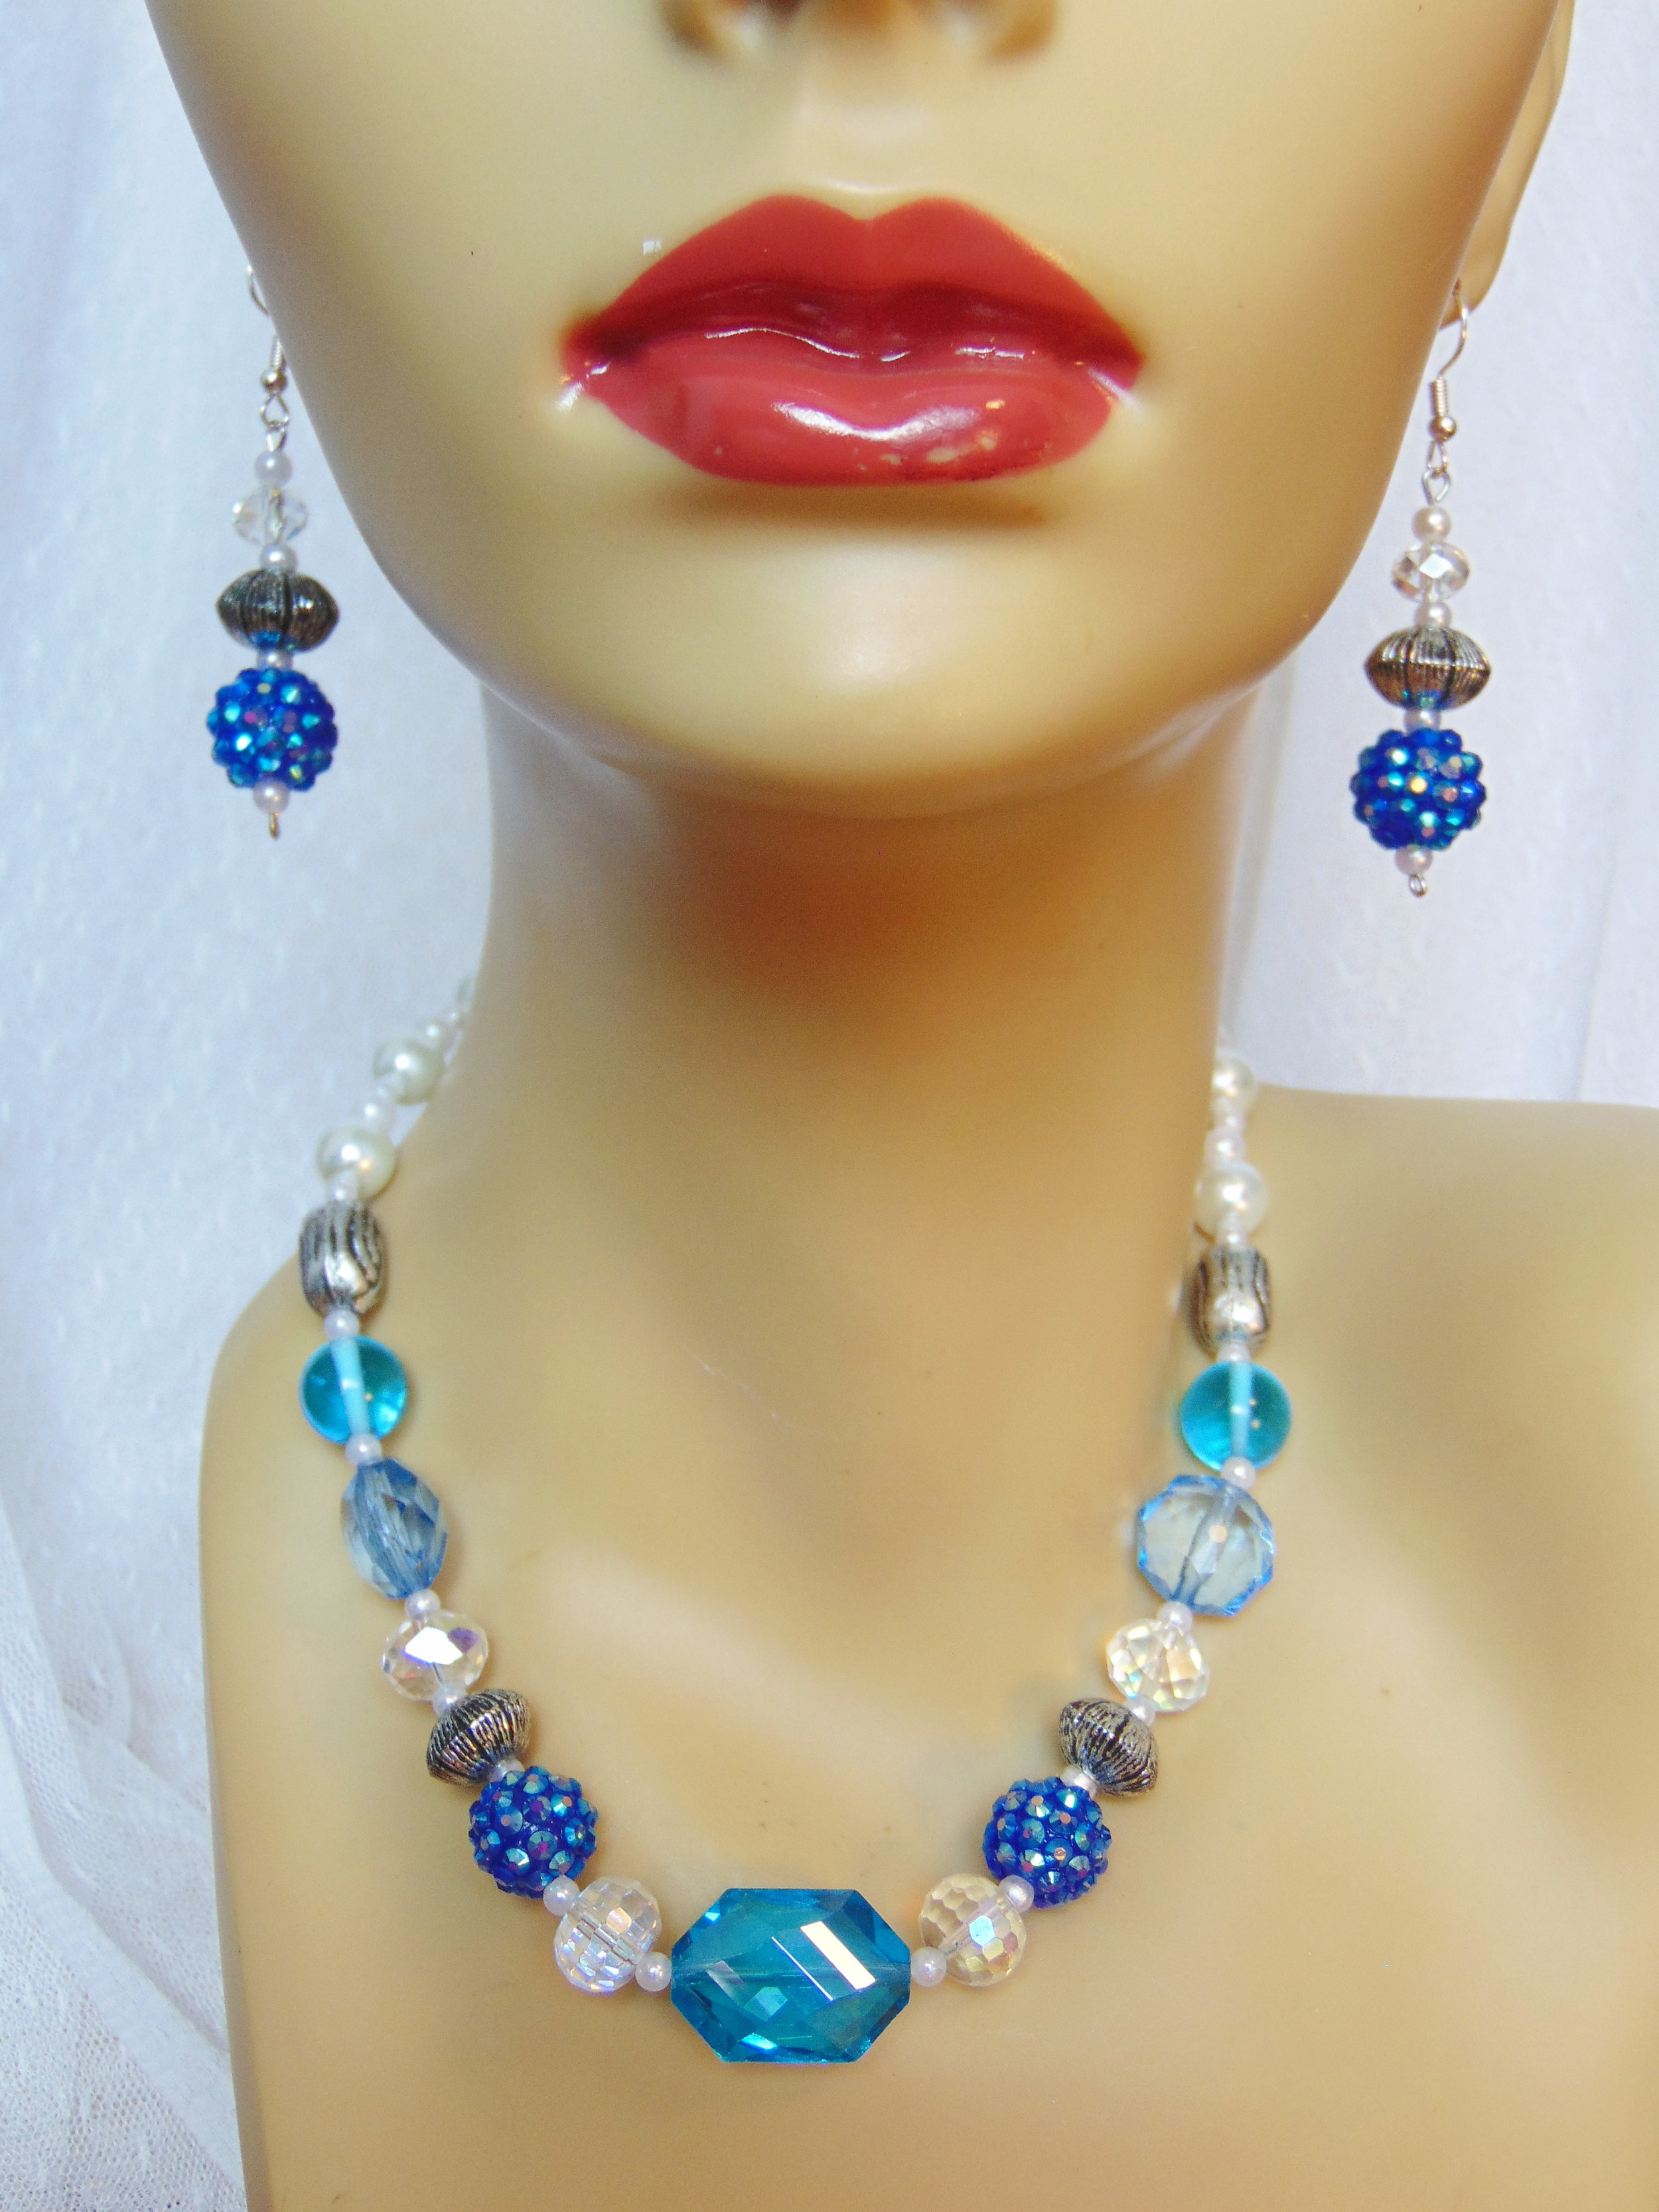 Handmade Necklace and Earring Sets by JMB Designs